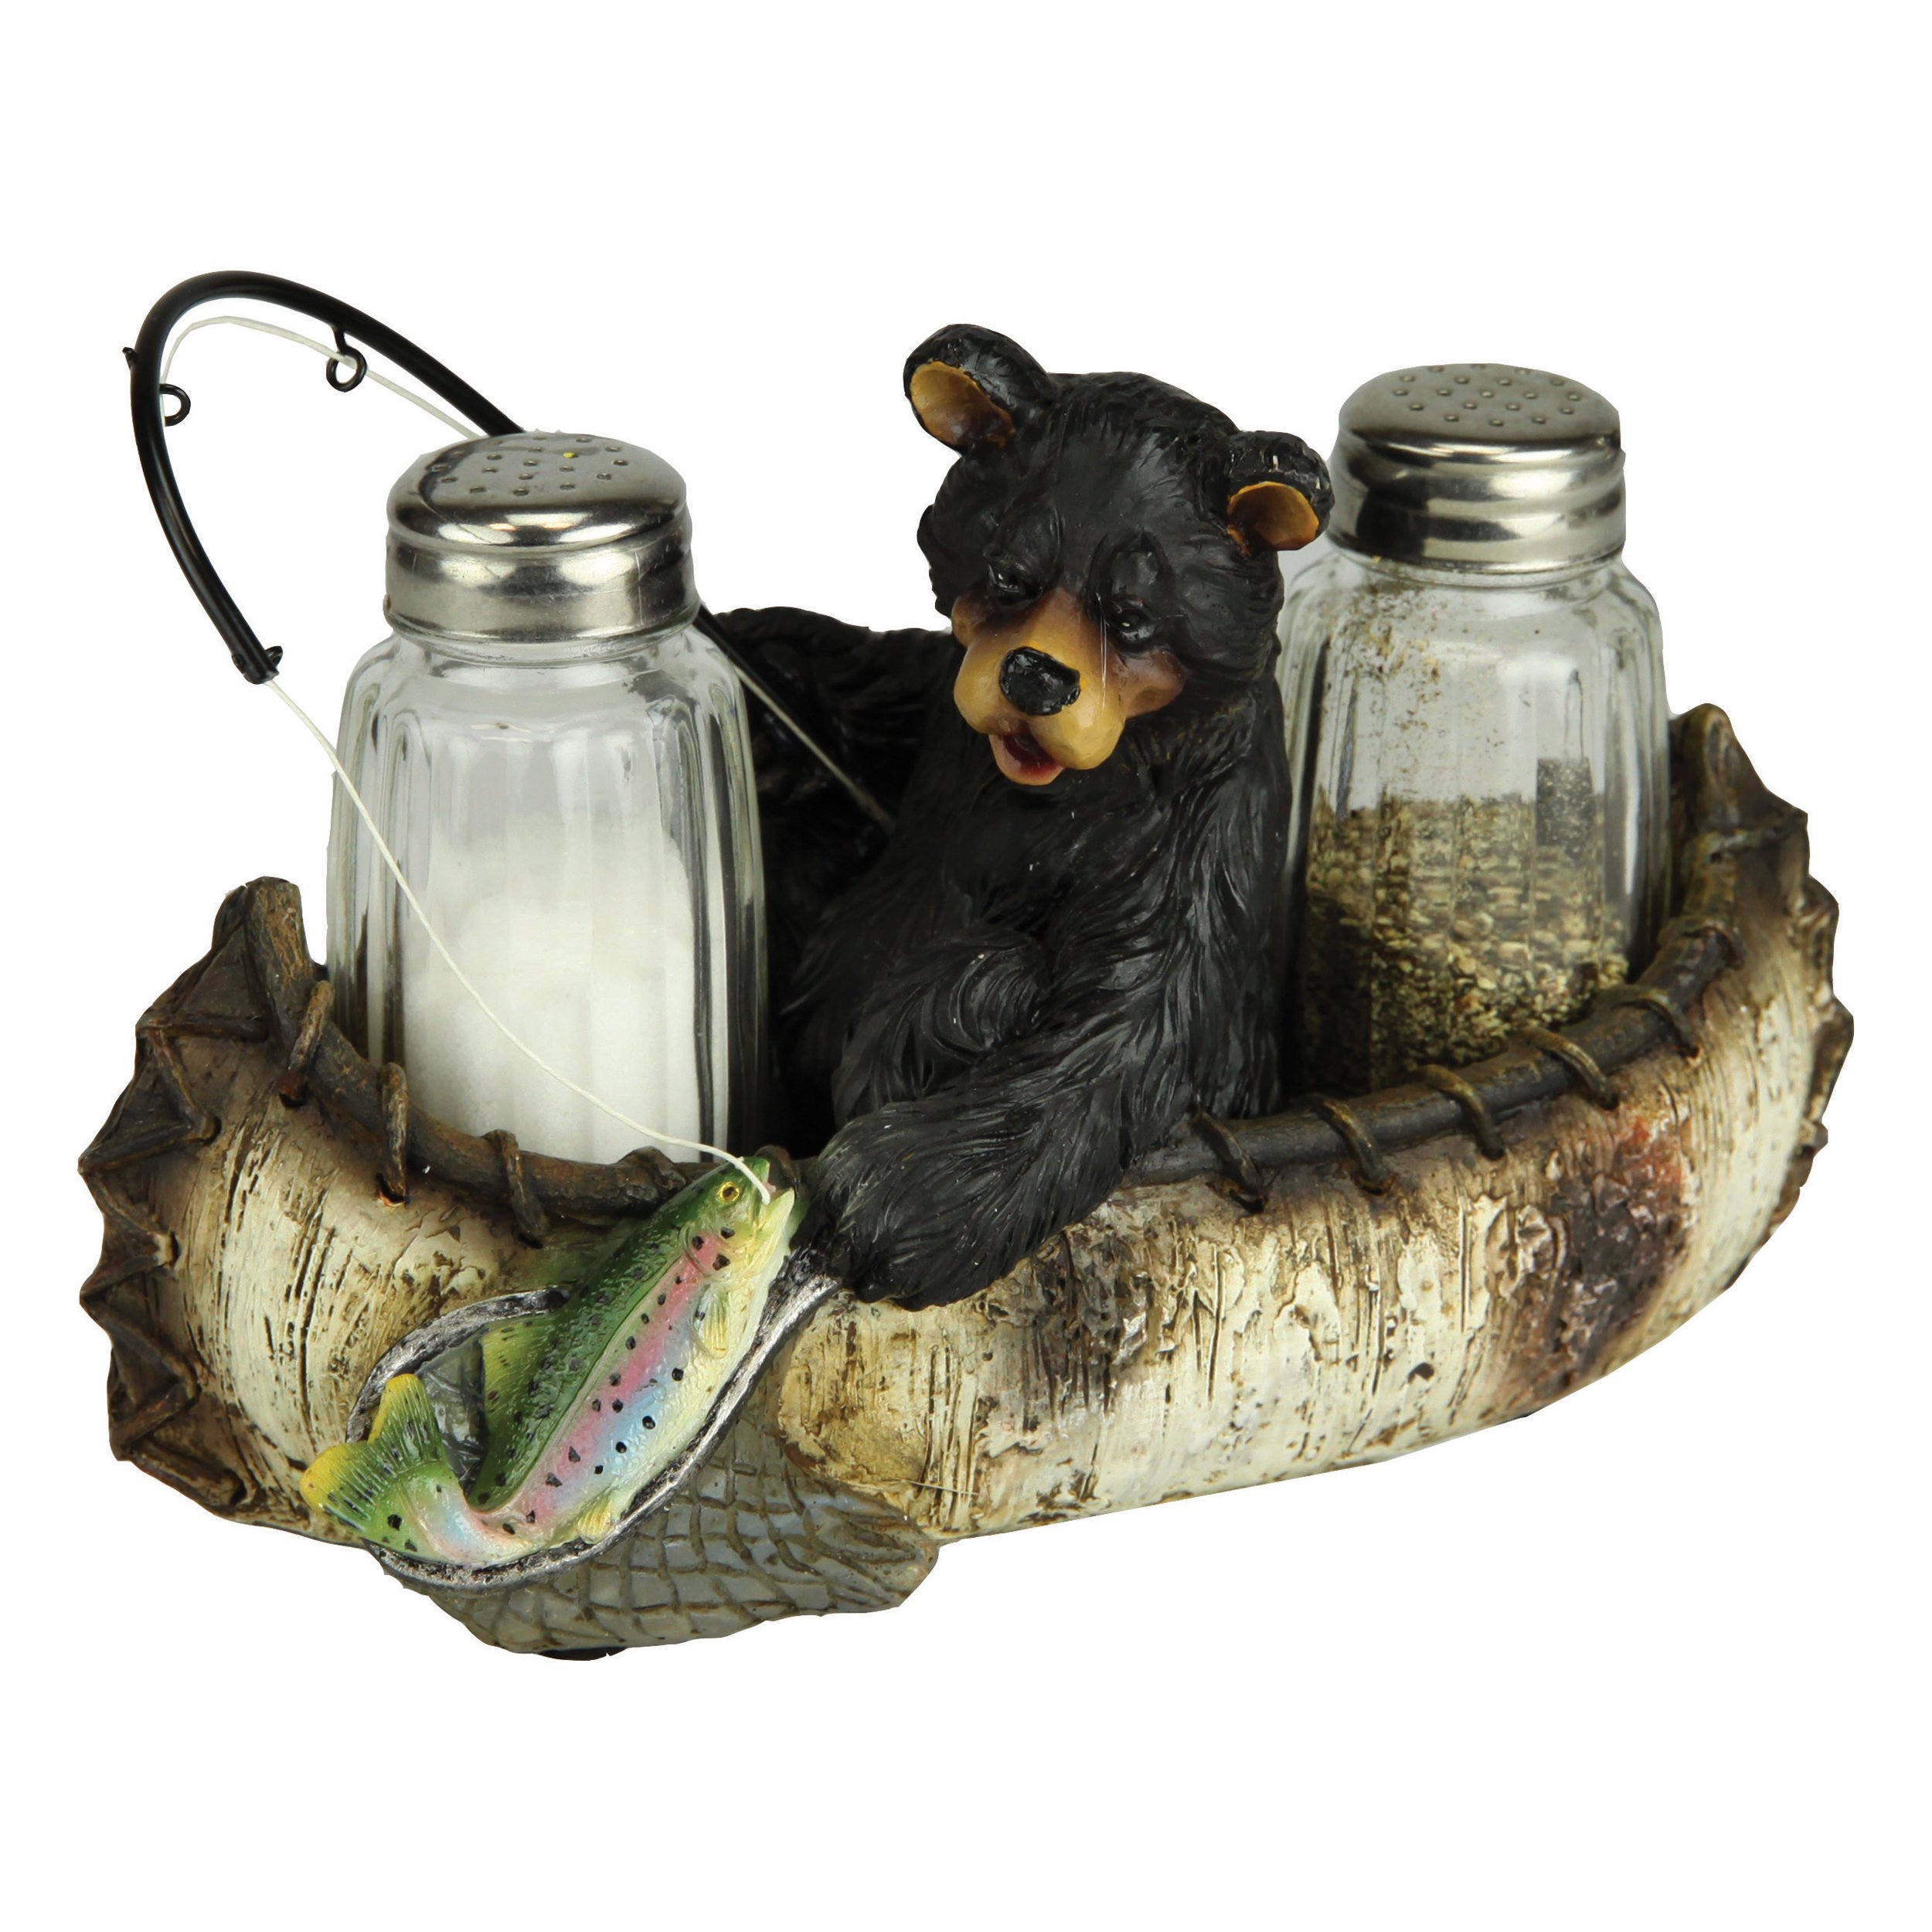 Two Fishing Moose in Canoe Salt and Pepper Shaker Holder 6 1/2 Inch Shakers Included